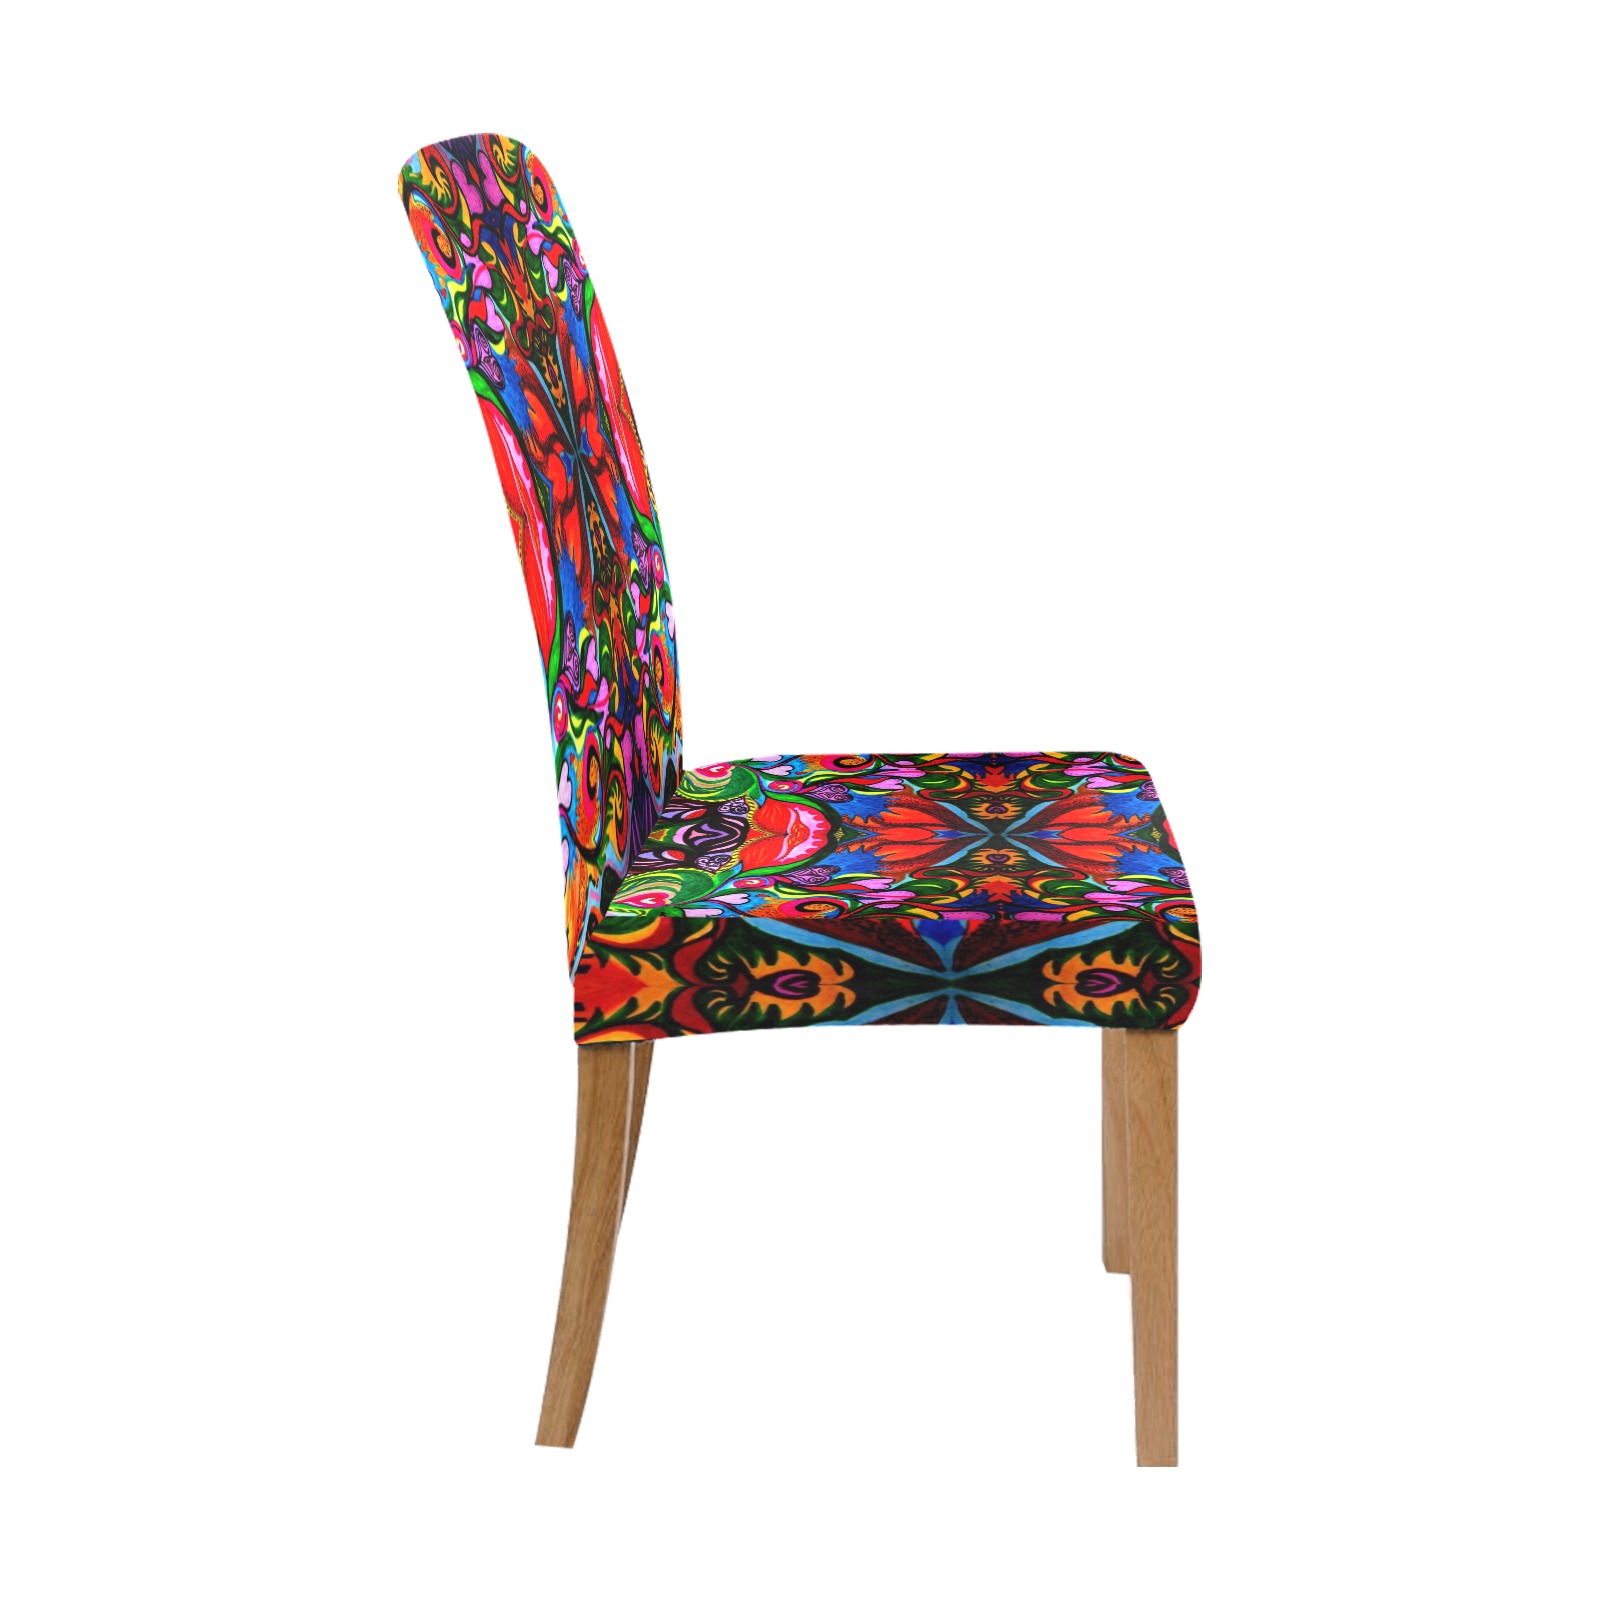 BOHO Night Garden Removable Dining Chair Cover